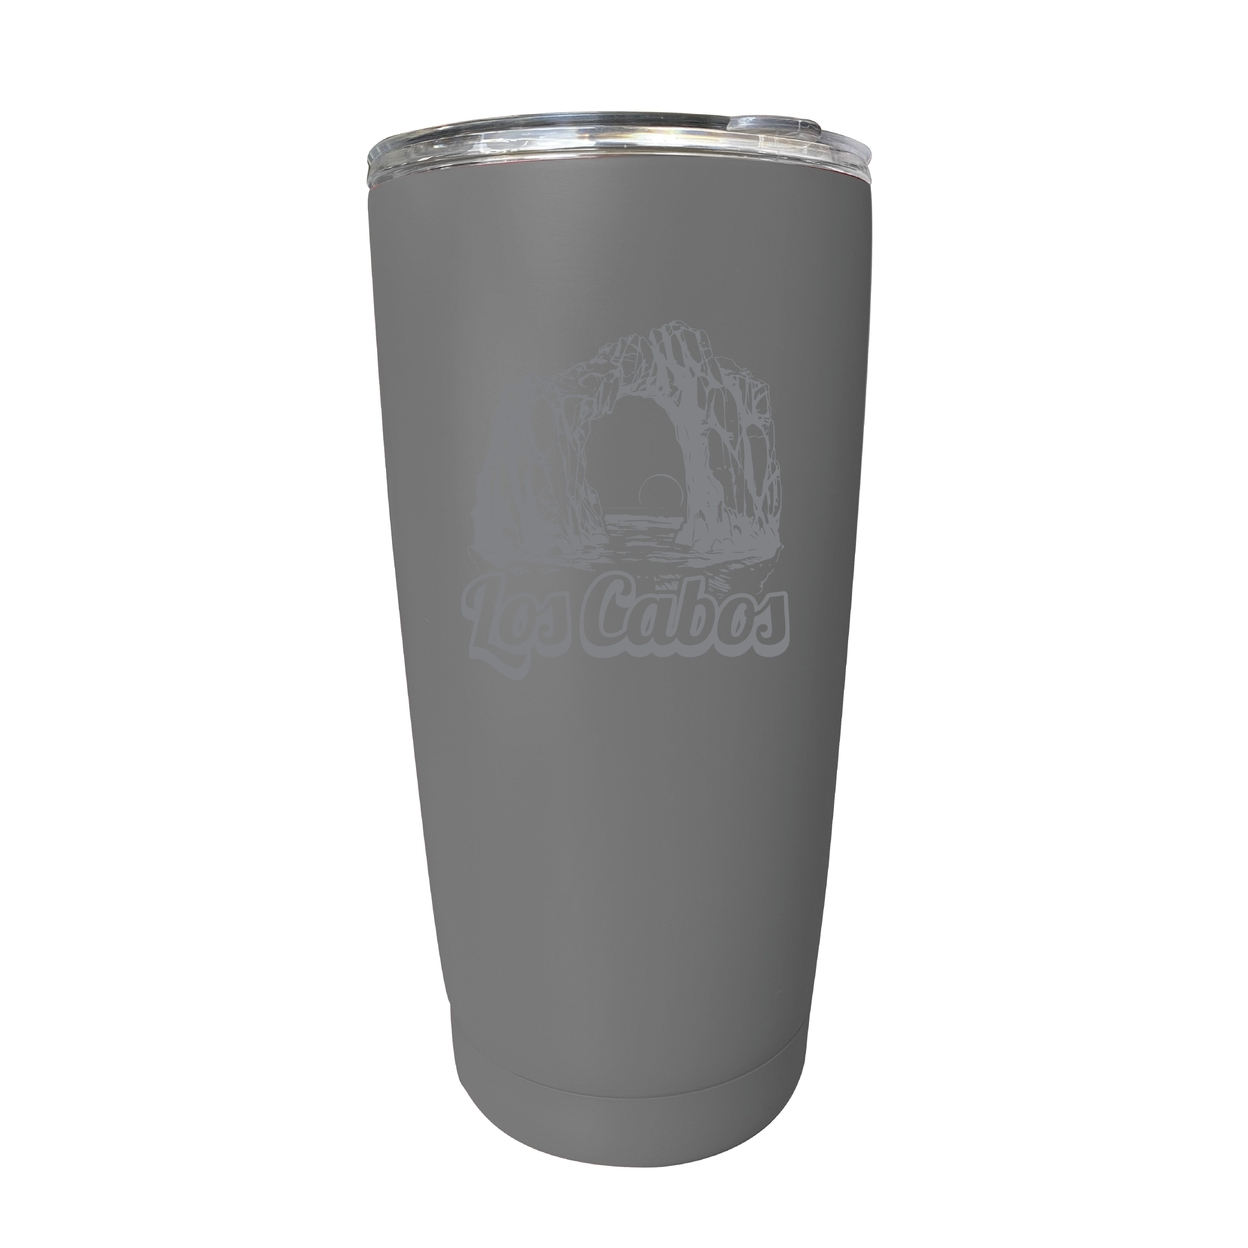 Los Cabos Mexico Souvenir 16 Oz Engraved Stainless Steel Insulated Tumbler - Gray,,2-Pack